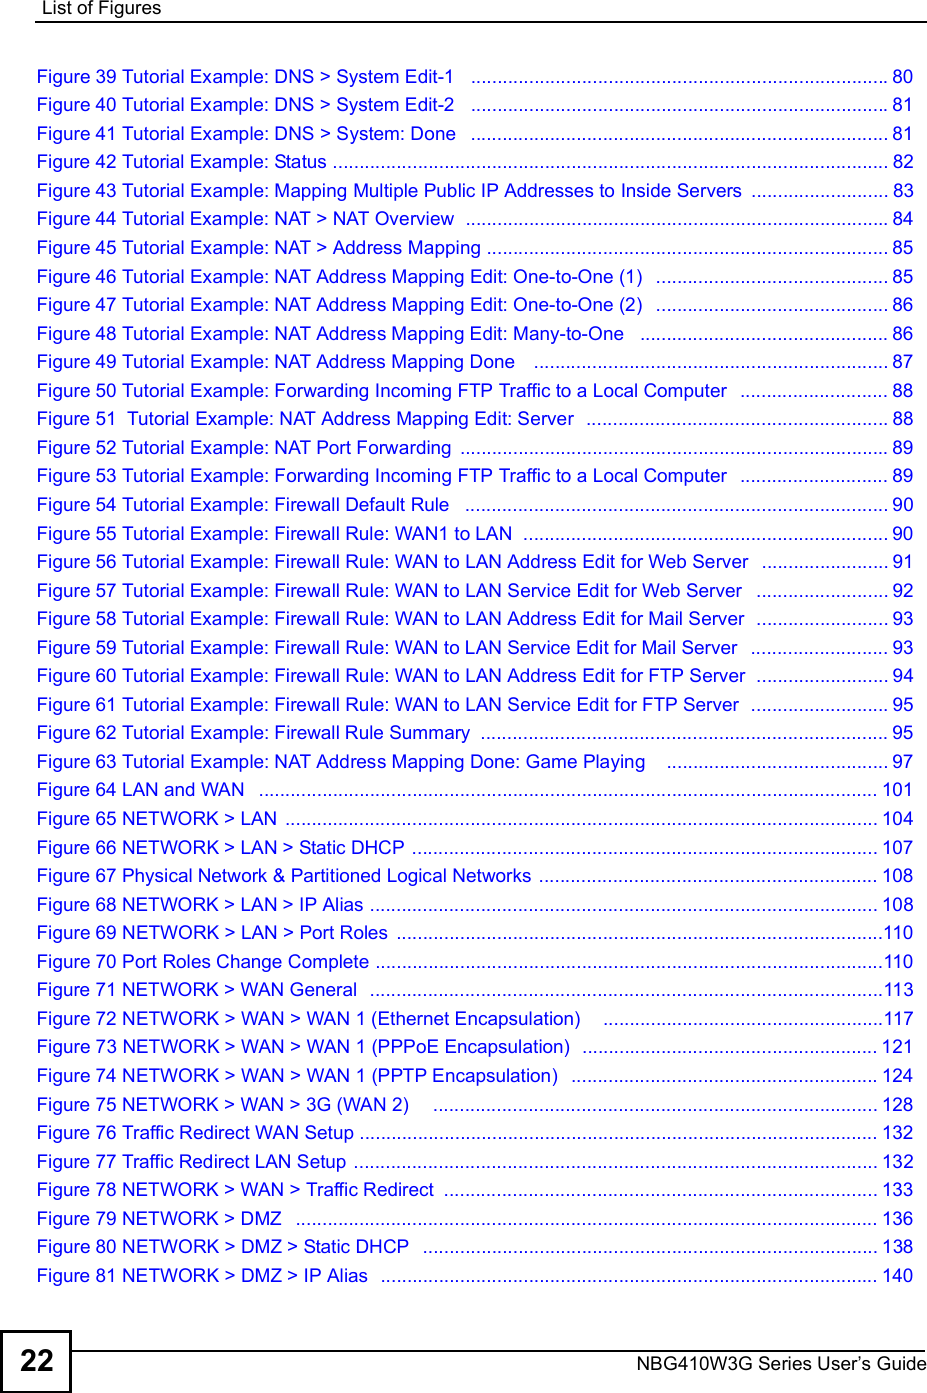 List of FiguresNBG410W3G Series User s Guide22Figure 39 Tutorial Example: DNS &gt; System Edit-1  ...............................................................................80Figure 40 Tutorial Example: DNS &gt; System Edit-2  ...............................................................................81Figure 41 Tutorial Example: DNS &gt; System: Done  ...............................................................................81Figure 42 Tutorial Example: Status .........................................................................................................82Figure 43 Tutorial Example: Mapping Multiple Public IP Addresses to Inside Servers ..........................83Figure 44 Tutorial Example: NAT &gt; NAT Overview  ................................................................................84Figure 45 Tutorial Example: NAT &gt; Address Mapping ............................................................................85Figure 46 Tutorial Example: NAT Address Mapping Edit: One-to-One (1)  ............................................85Figure 47 Tutorial Example: NAT Address Mapping Edit: One-to-One (2)  ............................................86Figure 48 Tutorial Example: NAT Address Mapping Edit: Many-to-One  ...............................................86Figure 49 Tutorial Example: NAT Address Mapping Done   ...................................................................87Figure 50 Tutorial Example: Forwarding Incoming FTP Traffic to a Local Computer  ............................88Figure 51  Tutorial Example: NAT Address Mapping Edit: Server  .........................................................88Figure 52 Tutorial Example: NAT Port Forwarding .................................................................................89Figure 53 Tutorial Example: Forwarding Incoming FTP Traffic to a Local Computer  ............................89Figure 54 Tutorial Example: Firewall Default Rule  ................................................................................90Figure 55 Tutorial Example: Firewall Rule: WAN1 to LAN  .....................................................................90Figure 56 Tutorial Example: Firewall Rule: WAN to LAN Address Edit for Web Server  ........................91Figure 57 Tutorial Example: Firewall Rule: WAN to LAN Service Edit for Web Server  .........................92Figure 58 Tutorial Example: Firewall Rule: WAN to LAN Address Edit for Mail Server  .........................93Figure 59 Tutorial Example: Firewall Rule: WAN to LAN Service Edit for Mail Server  ..........................93Figure 60 Tutorial Example: Firewall Rule: WAN to LAN Address Edit for FTP Server  .........................94Figure 61 Tutorial Example: Firewall Rule: WAN to LAN Service Edit for FTP Server  ..........................95Figure 62 Tutorial Example: Firewall Rule Summary .............................................................................95Figure 63 Tutorial Example: NAT Address Mapping Done: Game Playing   ..........................................97Figure 64 LAN and WAN  .....................................................................................................................101Figure 65 NETWORK &gt; LAN ................................................................................................................104Figure 66 NETWORK &gt; LAN &gt; Static DHCP ........................................................................................107Figure 67 Physical Network &amp; Partitioned Logical Networks ................................................................108Figure 68 NETWORK &gt; LAN &gt; IP Alias ................................................................................................108Figure 69 NETWORK &gt; LAN &gt; Port Roles ............................................................................................110Figure 70 Port Roles Change Complete ................................................................................................110Figure 71 NETWORK &gt; WAN General  .................................................................................................113Figure 72 NETWORK &gt; WAN &gt; WAN 1 (Ethernet Encapsulation)    .....................................................117Figure 73 NETWORK &gt; WAN &gt; WAN 1 (PPPoE Encapsulation)  ........................................................121Figure 74 NETWORK &gt; WAN &gt; WAN 1 (PPTP Encapsulation)  ..........................................................124Figure 75 NETWORK &gt; WAN &gt; 3G (WAN 2)    ....................................................................................128Figure 76 Traffic Redirect WAN Setup ..................................................................................................132Figure 77 Traffic Redirect LAN Setup ...................................................................................................132Figure 78 NETWORK &gt; WAN &gt; Traffic Redirect ..................................................................................133Figure 79 NETWORK &gt; DMZ  ..............................................................................................................136Figure 80 NETWORK &gt; DMZ &gt; Static DHCP  ......................................................................................138Figure 81 NETWORK &gt; DMZ &gt; IP Alias  ..............................................................................................140